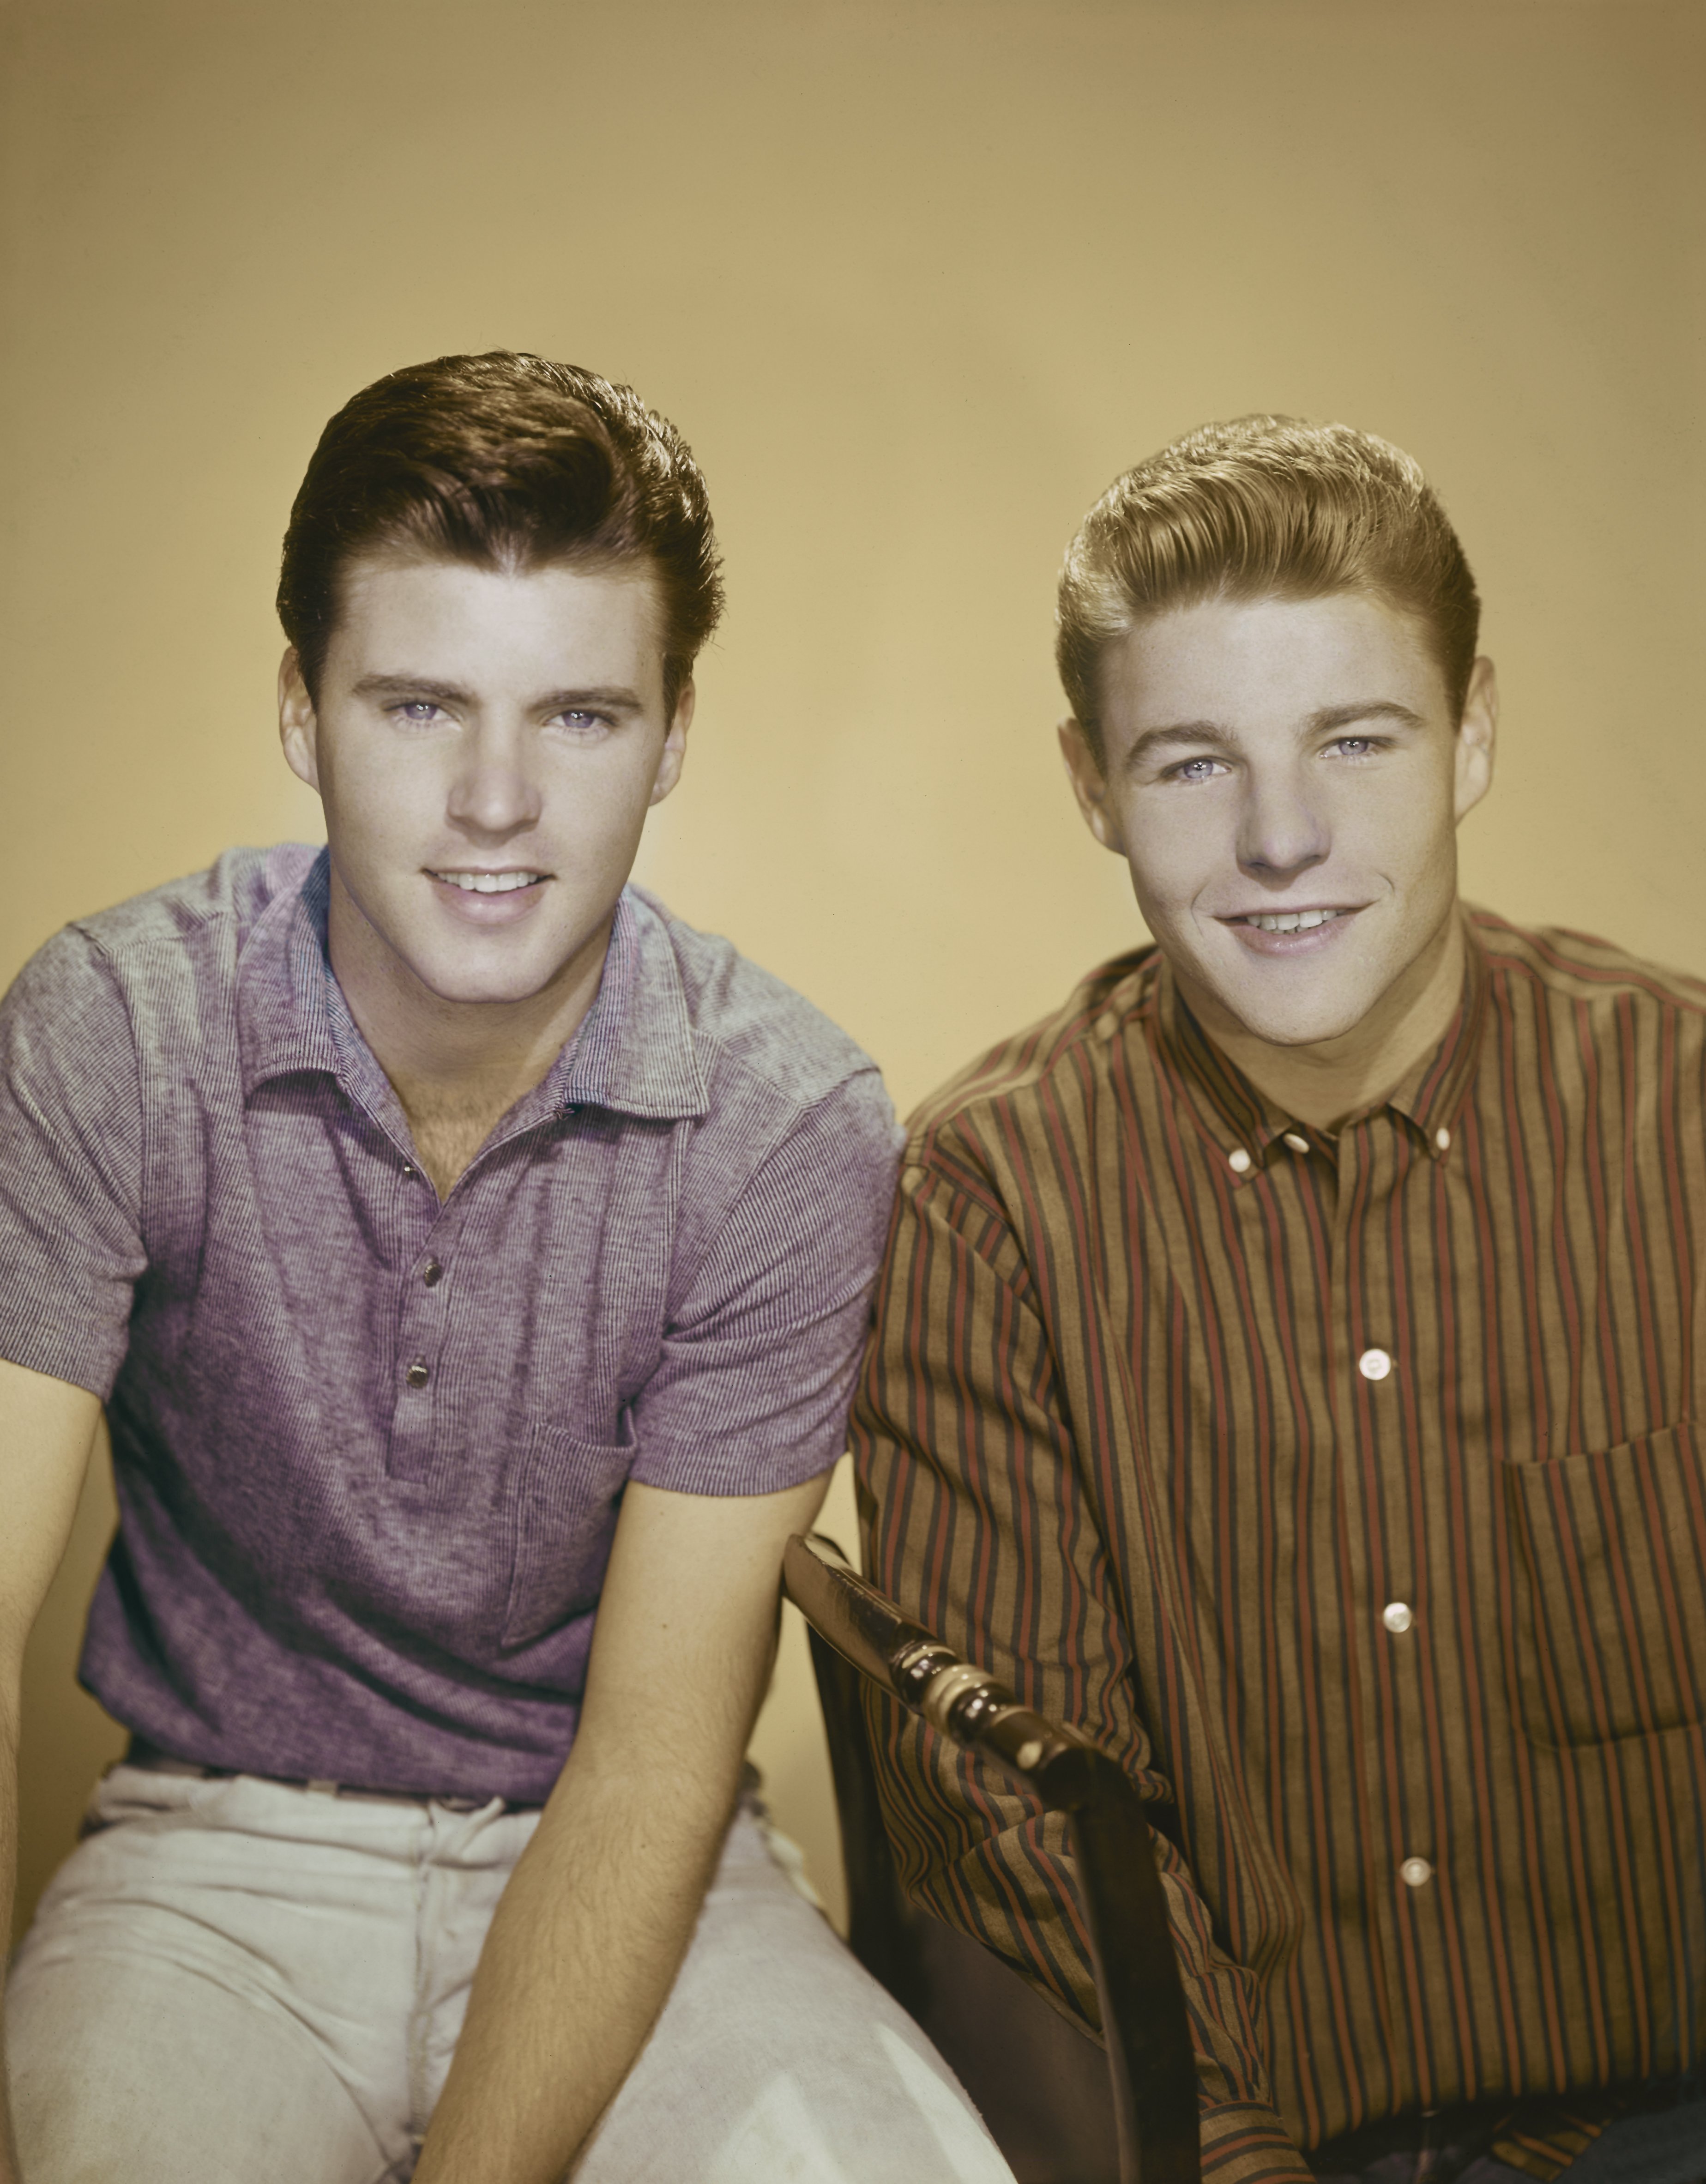 Ricky and David Nelson pose for a photo together circa 1957 | Source: Getty Images